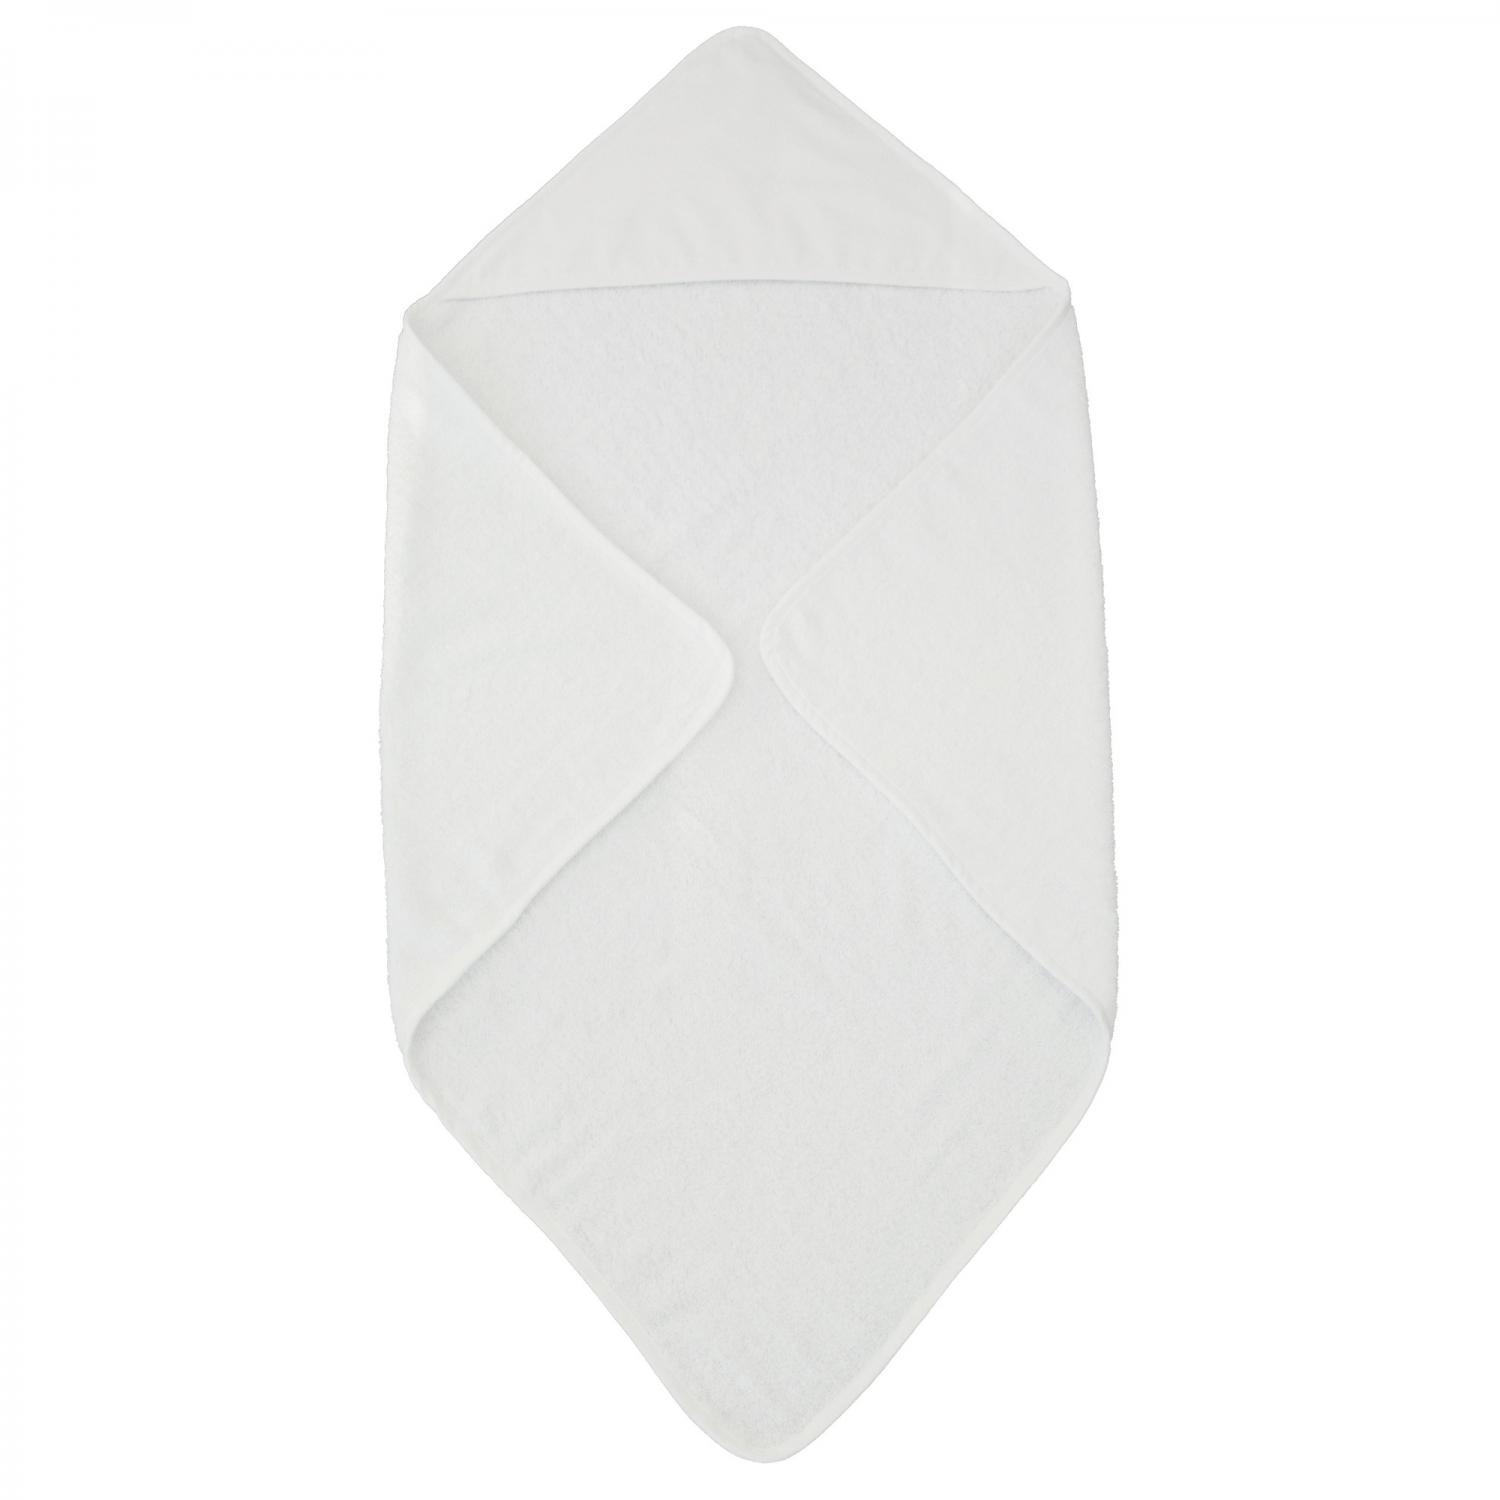 Hooded towel classic white